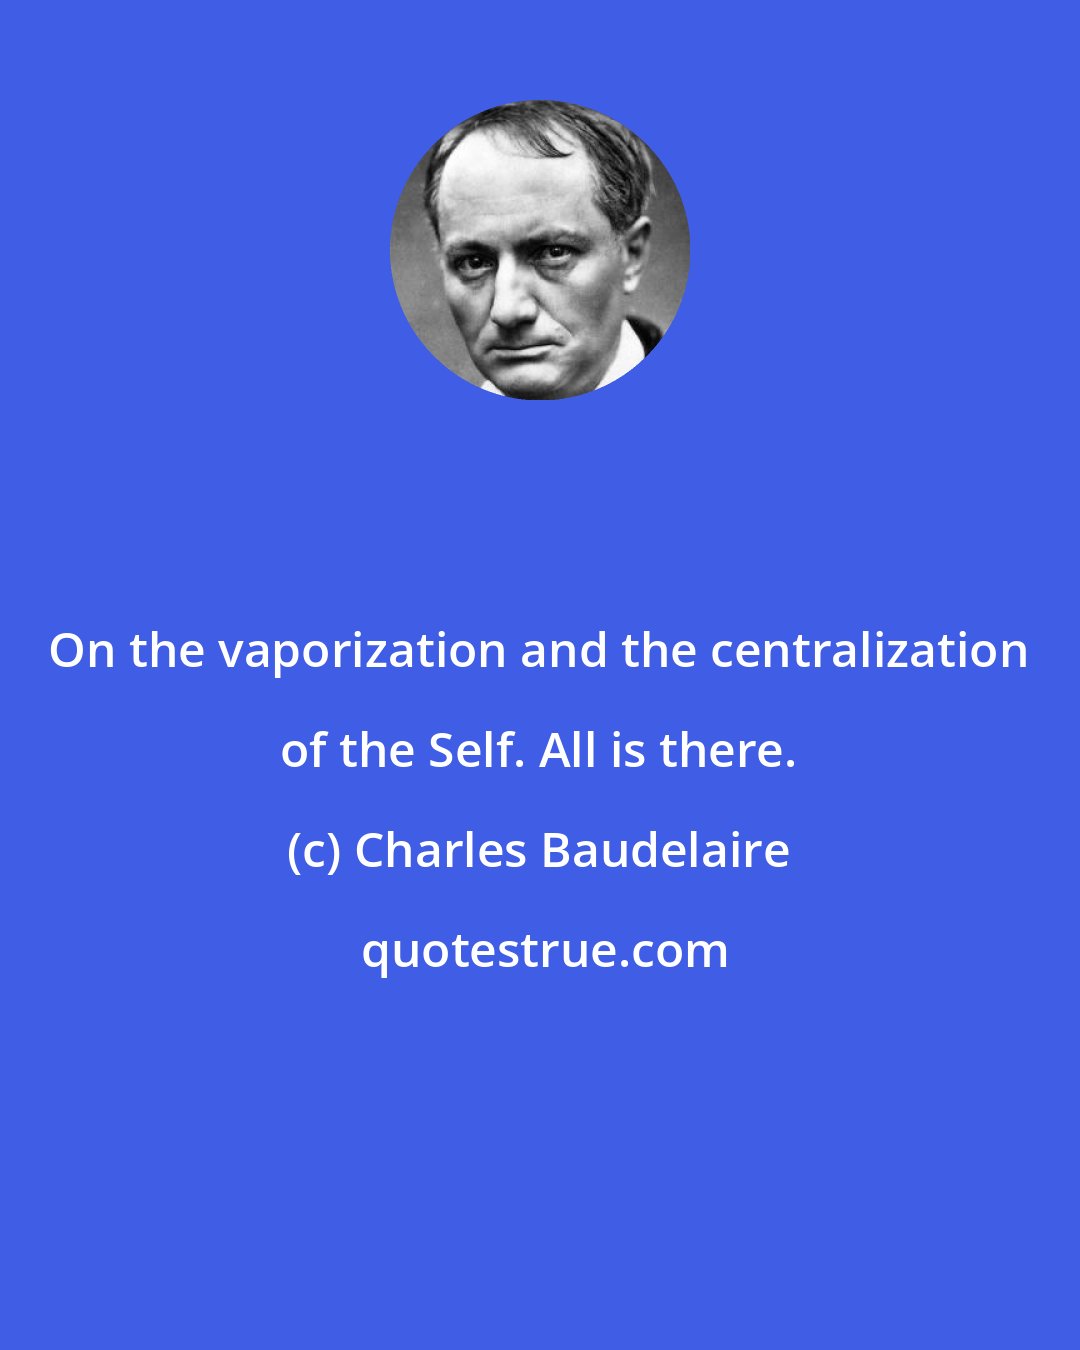 Charles Baudelaire: On the vaporization and the centralization of the Self. All is there.